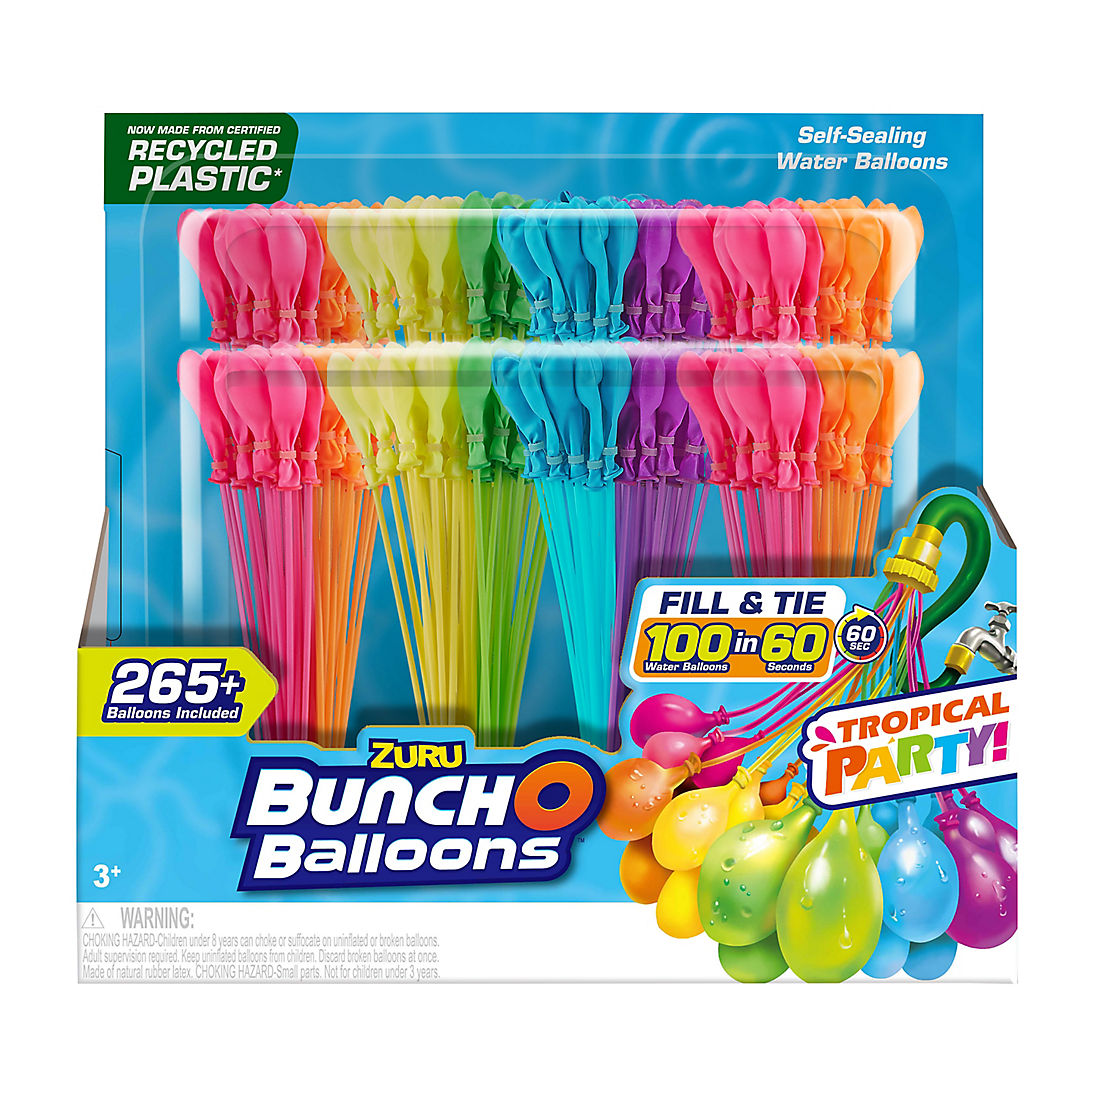 Tie-Not Garden Hose Water Balloon Filling Set with 50 Balloons Color May Vary for sale online 